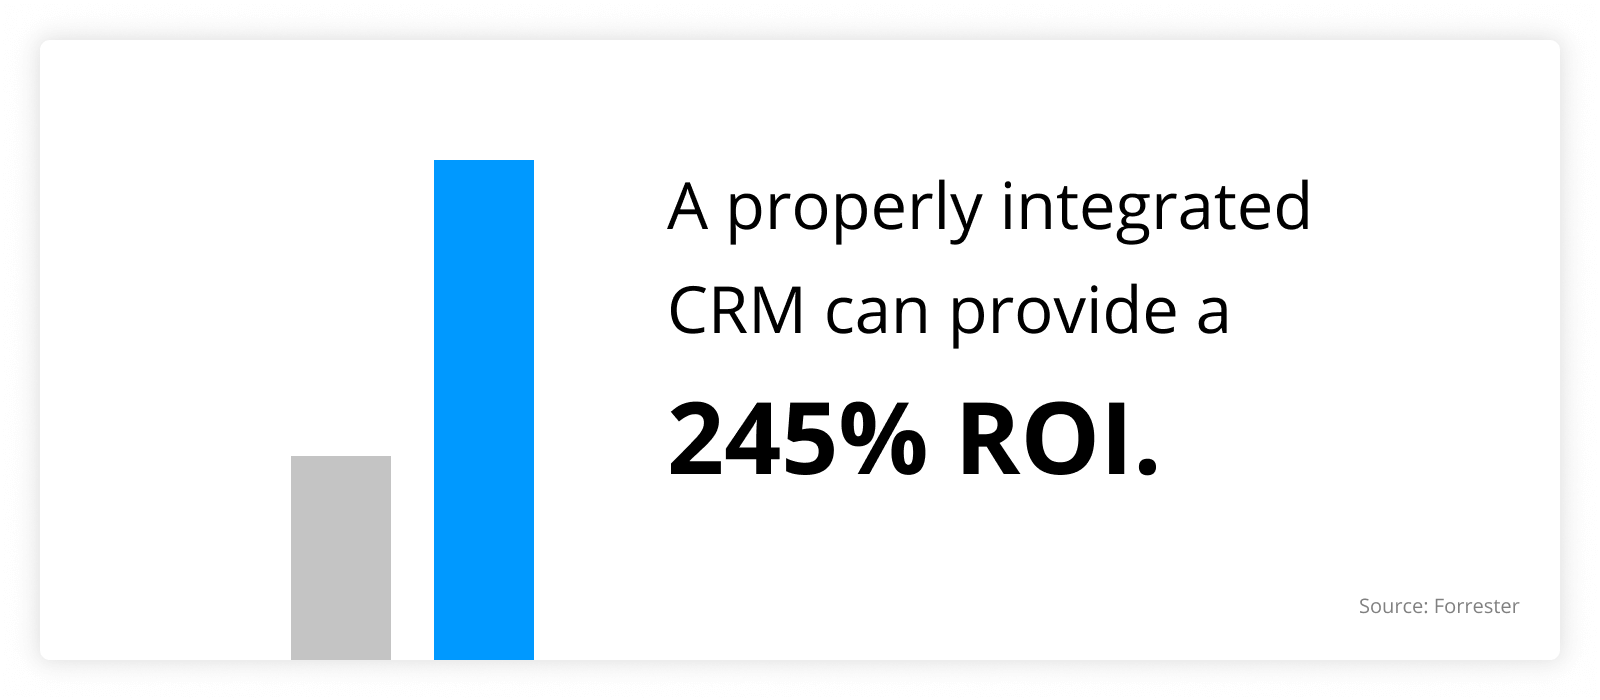 graph showing that A properly integrated CRM can provide a 245% ROI